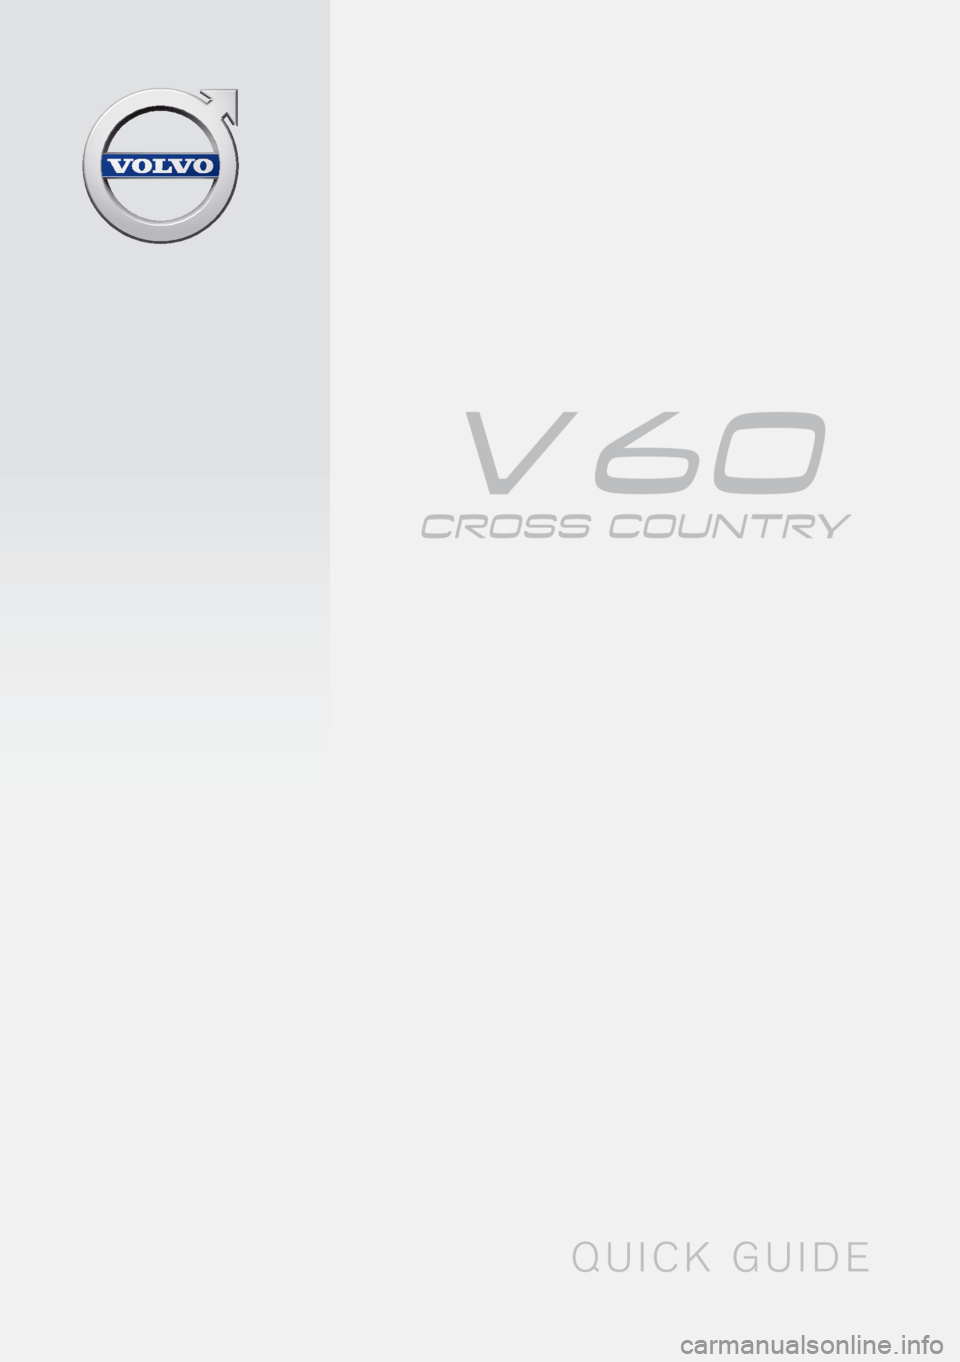 VOLVO V60 CROSS COUNTRY 2017  Quick Guide 